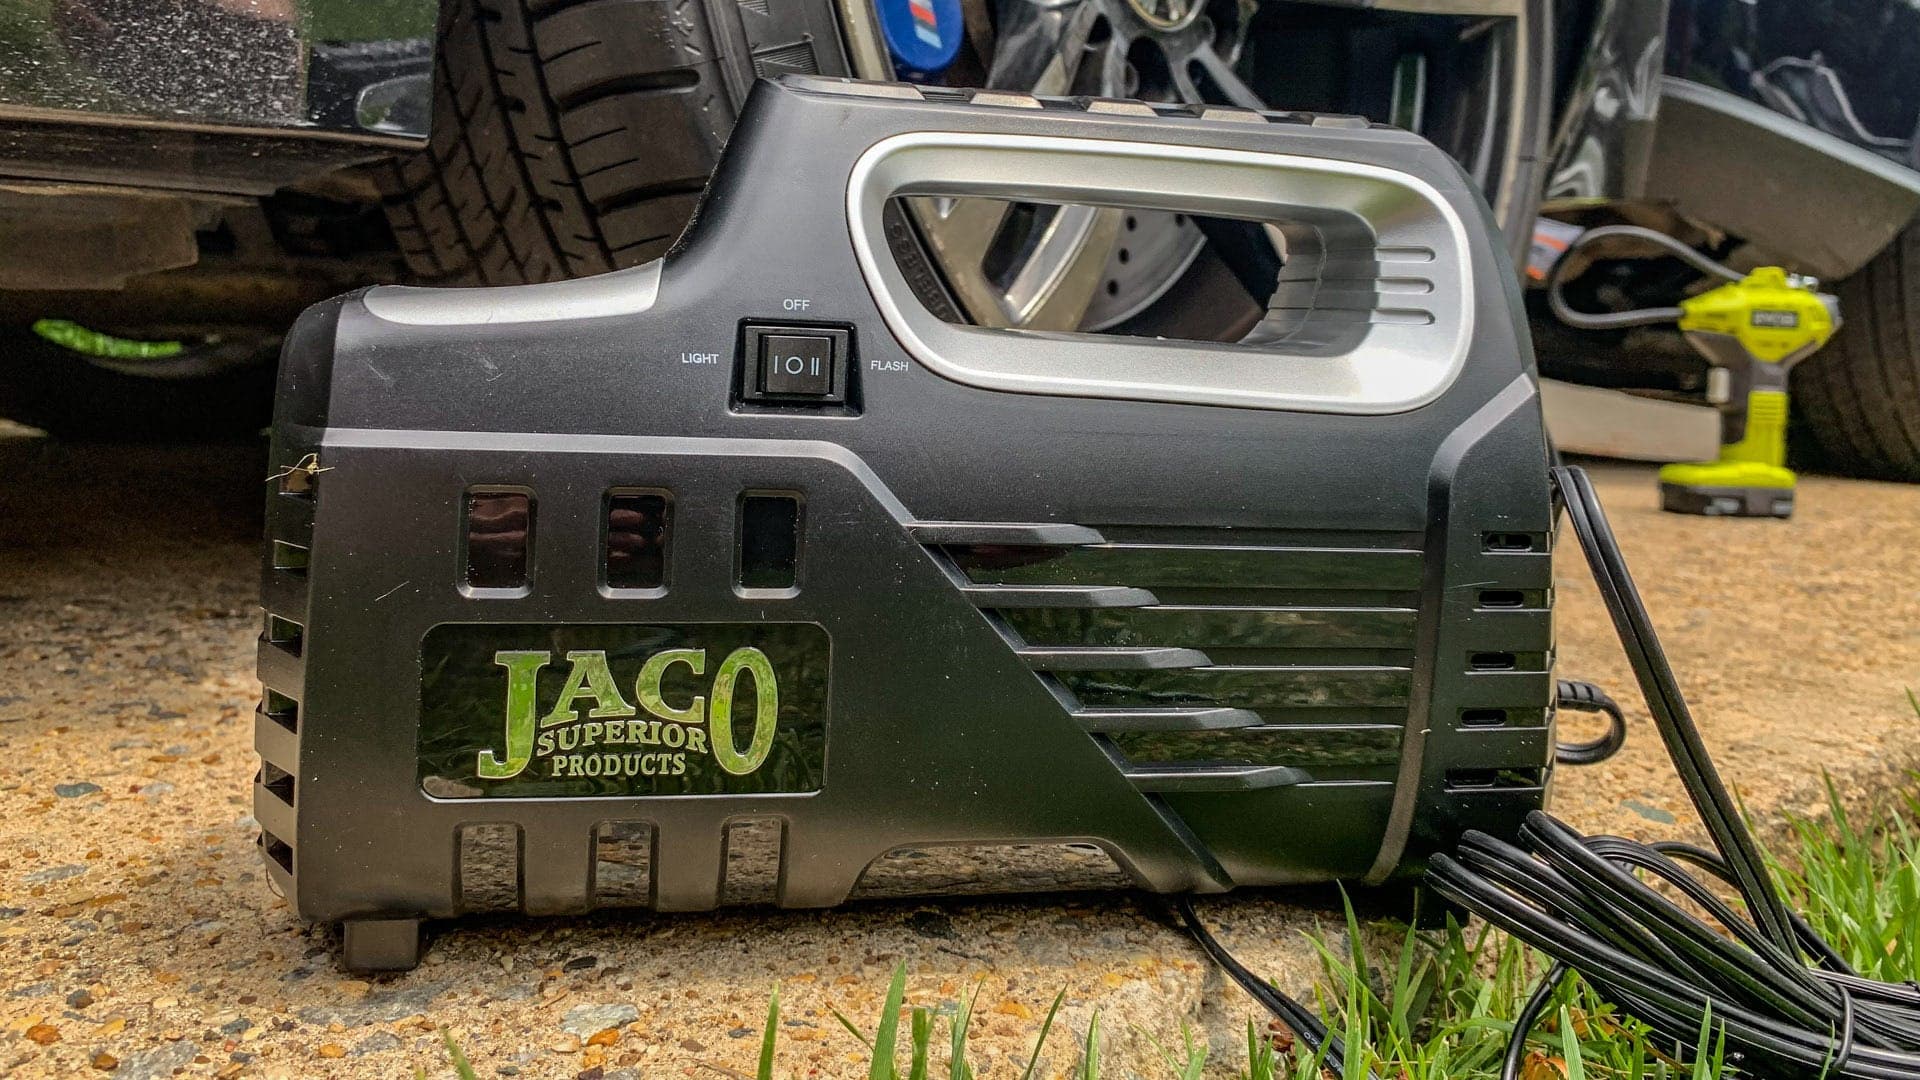 We Ramp Up the PSI While Testing the Jaco SmartPro 2.0 AC/DC Digital Tire Inflator